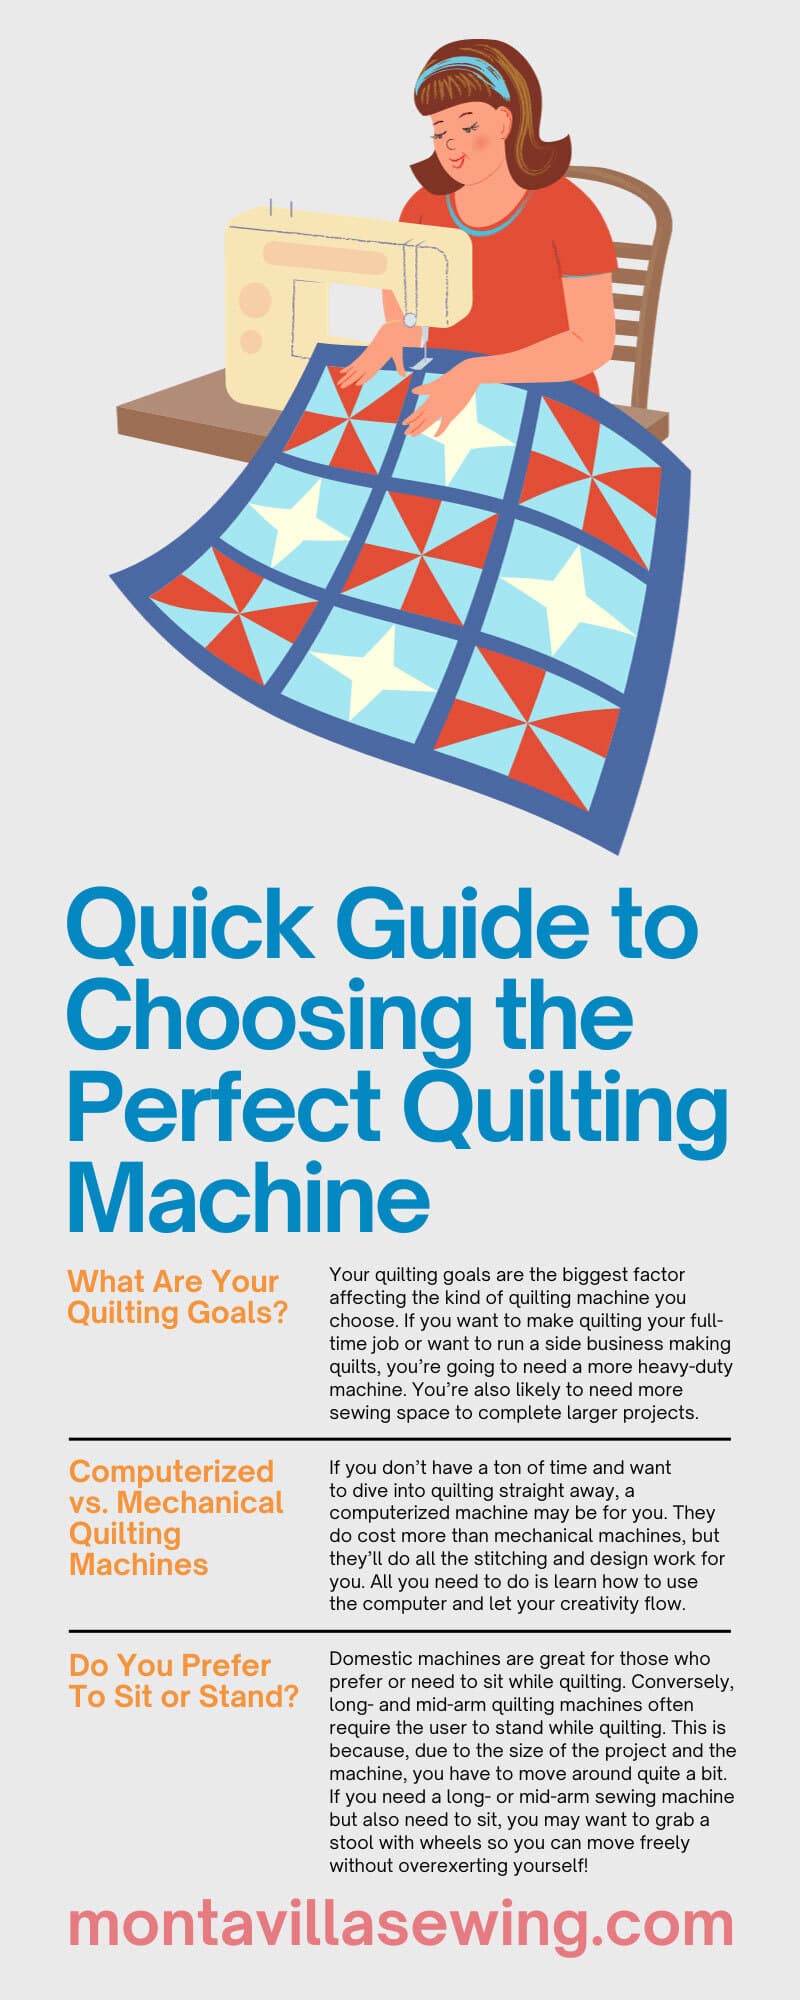 Quick Guide to Choosing the Perfect Quilting Machine